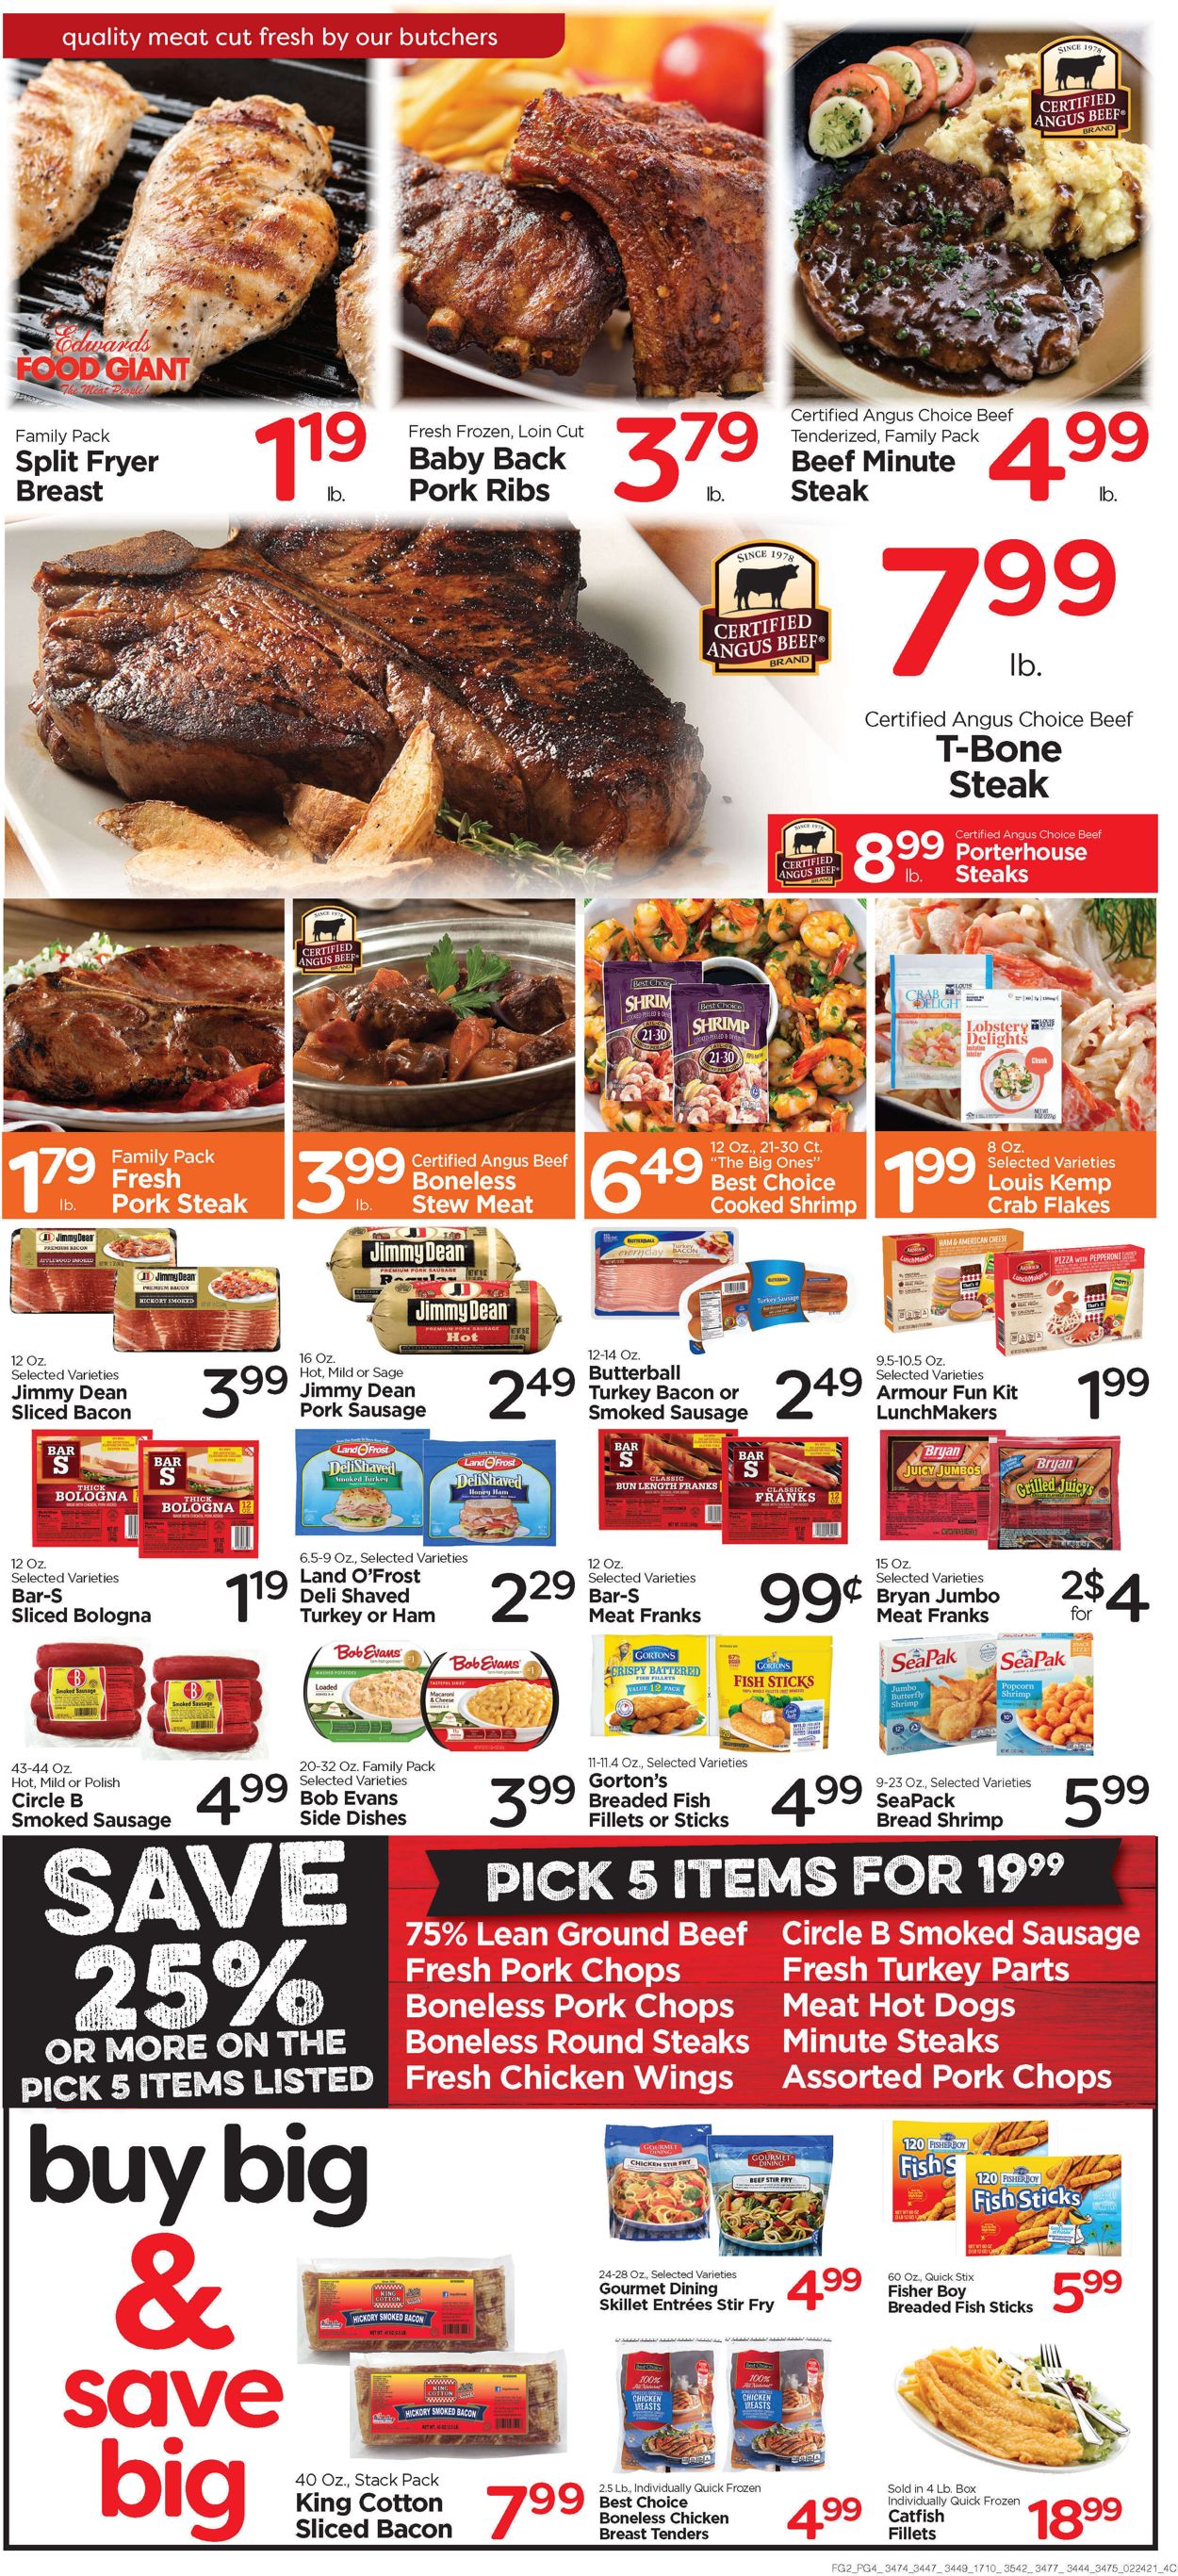 Catalogue Edwards Food Giant from 02/24/2021